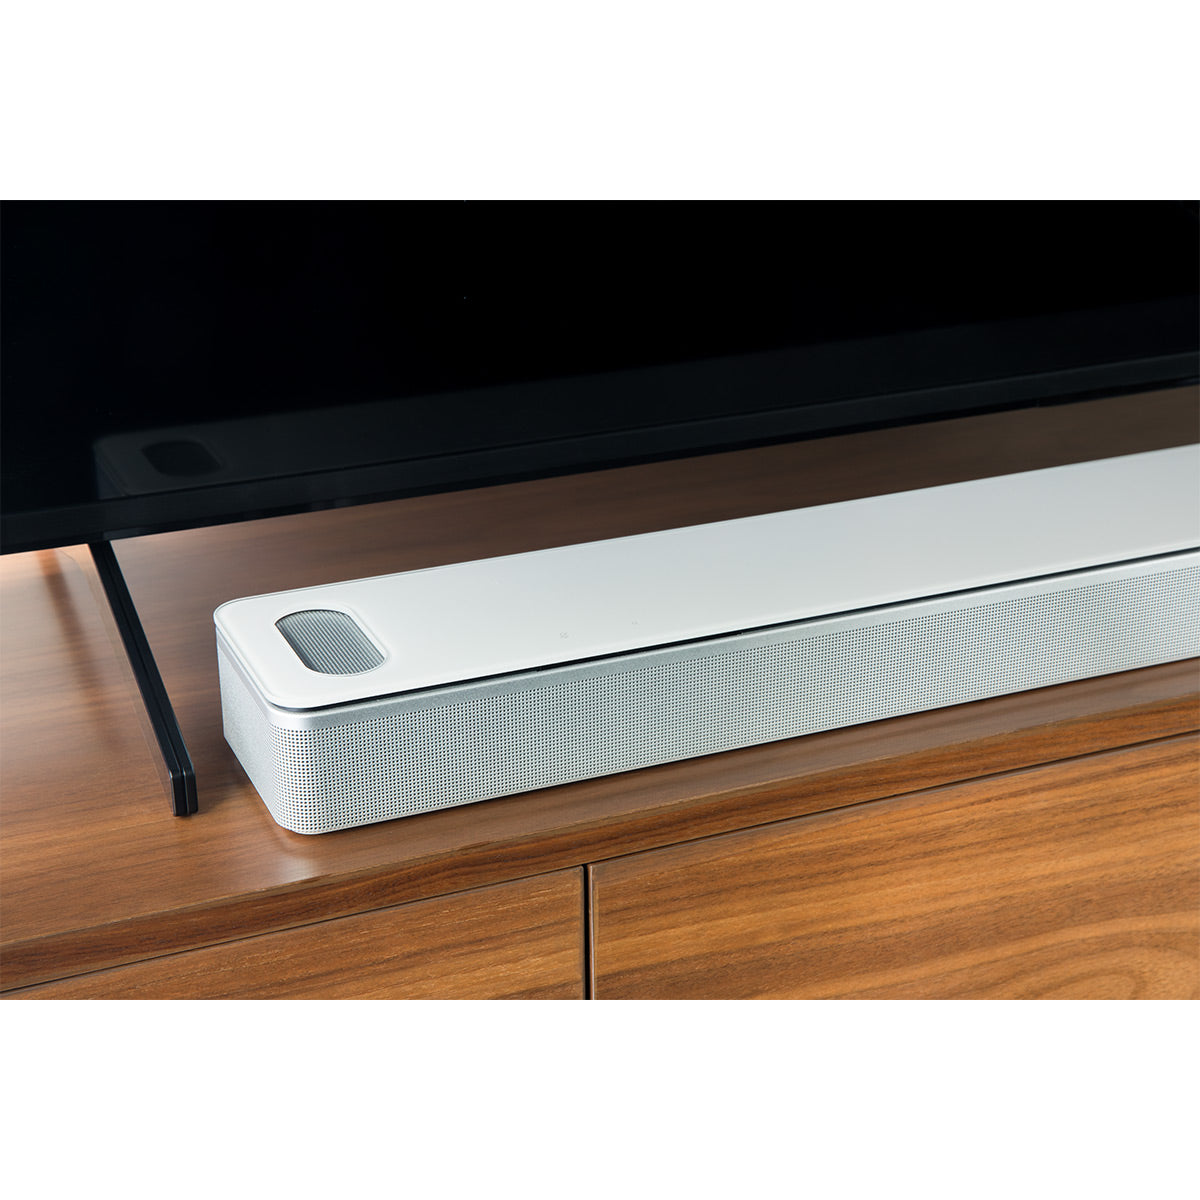 Bose Soundbar 900 Home Theater Stereo 700 (White) Bass | Module Subwoofer World with System Wide